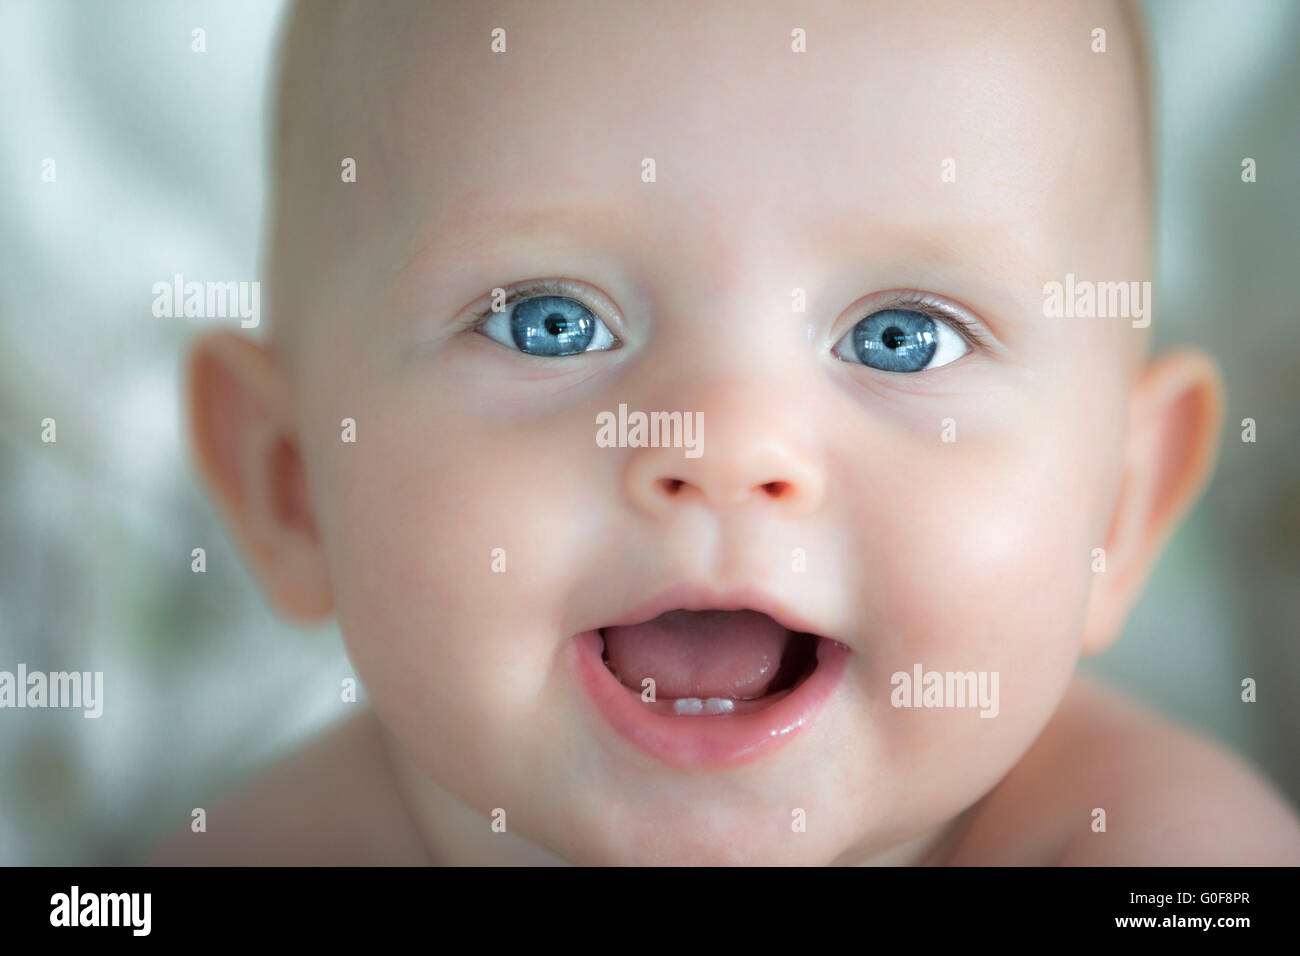 Close up of smiling baby, 6 months old showing blue eyes and two baby teeth. Stock Photo